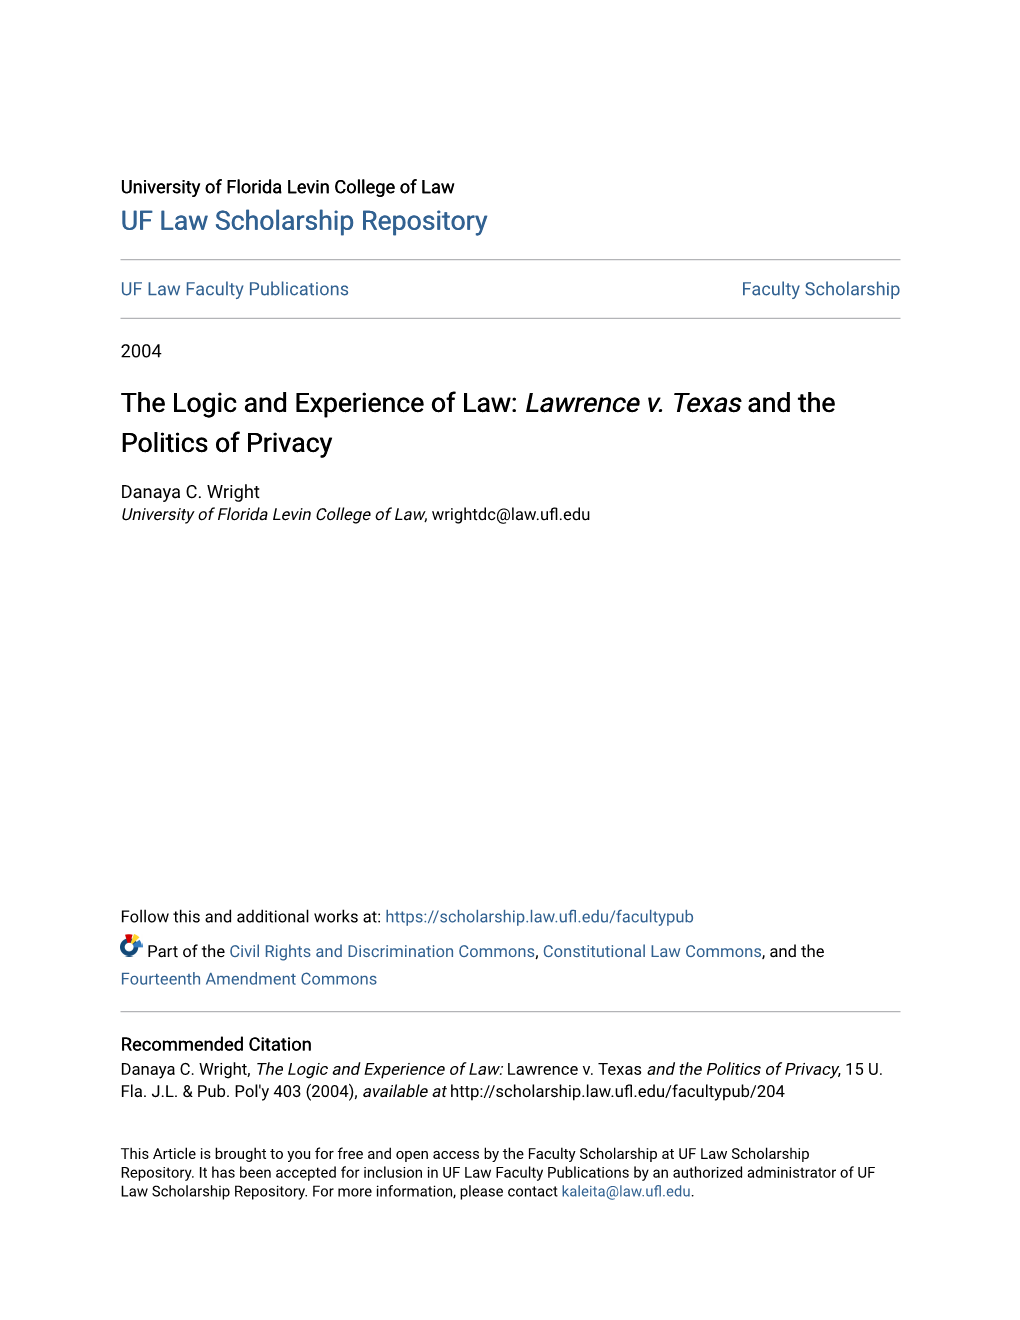 The Logic and Experience of Law: &lt;I&gt;Lawrence V. Texas&lt;/I&gt;